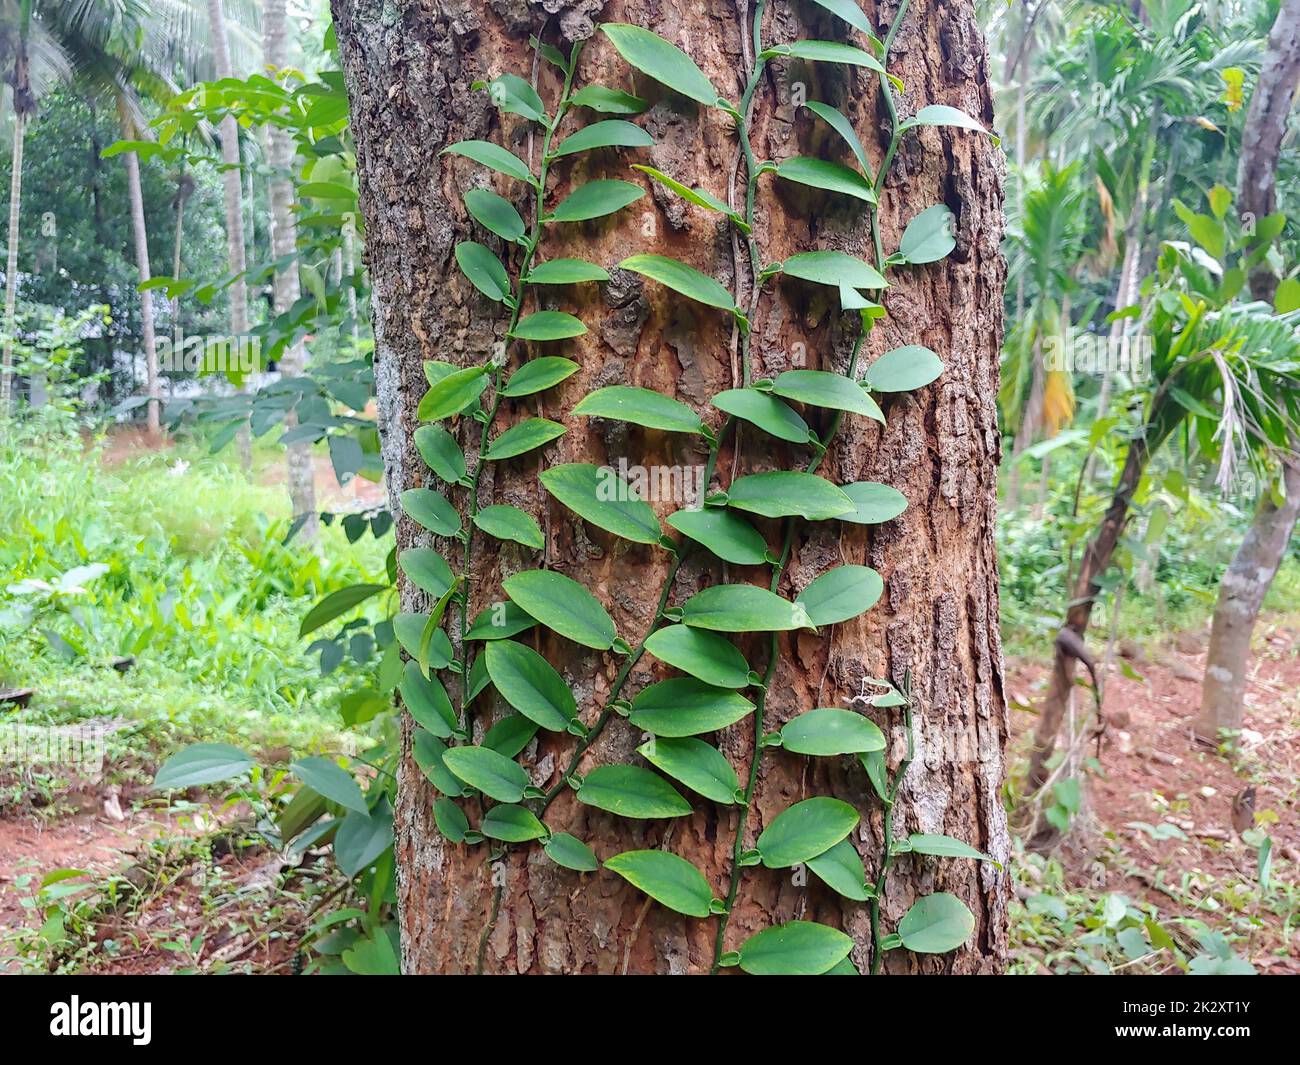 A climber plant on a tree trunkivy, stem, botany, climber, garden, foliage, leaf, creeper, ornamental, decoration, growth, natural, tree branch, climbing, vine, nature, green, background, root, paint, texture, ornament, rambler, evergreen, forest, liana, Stock Photo